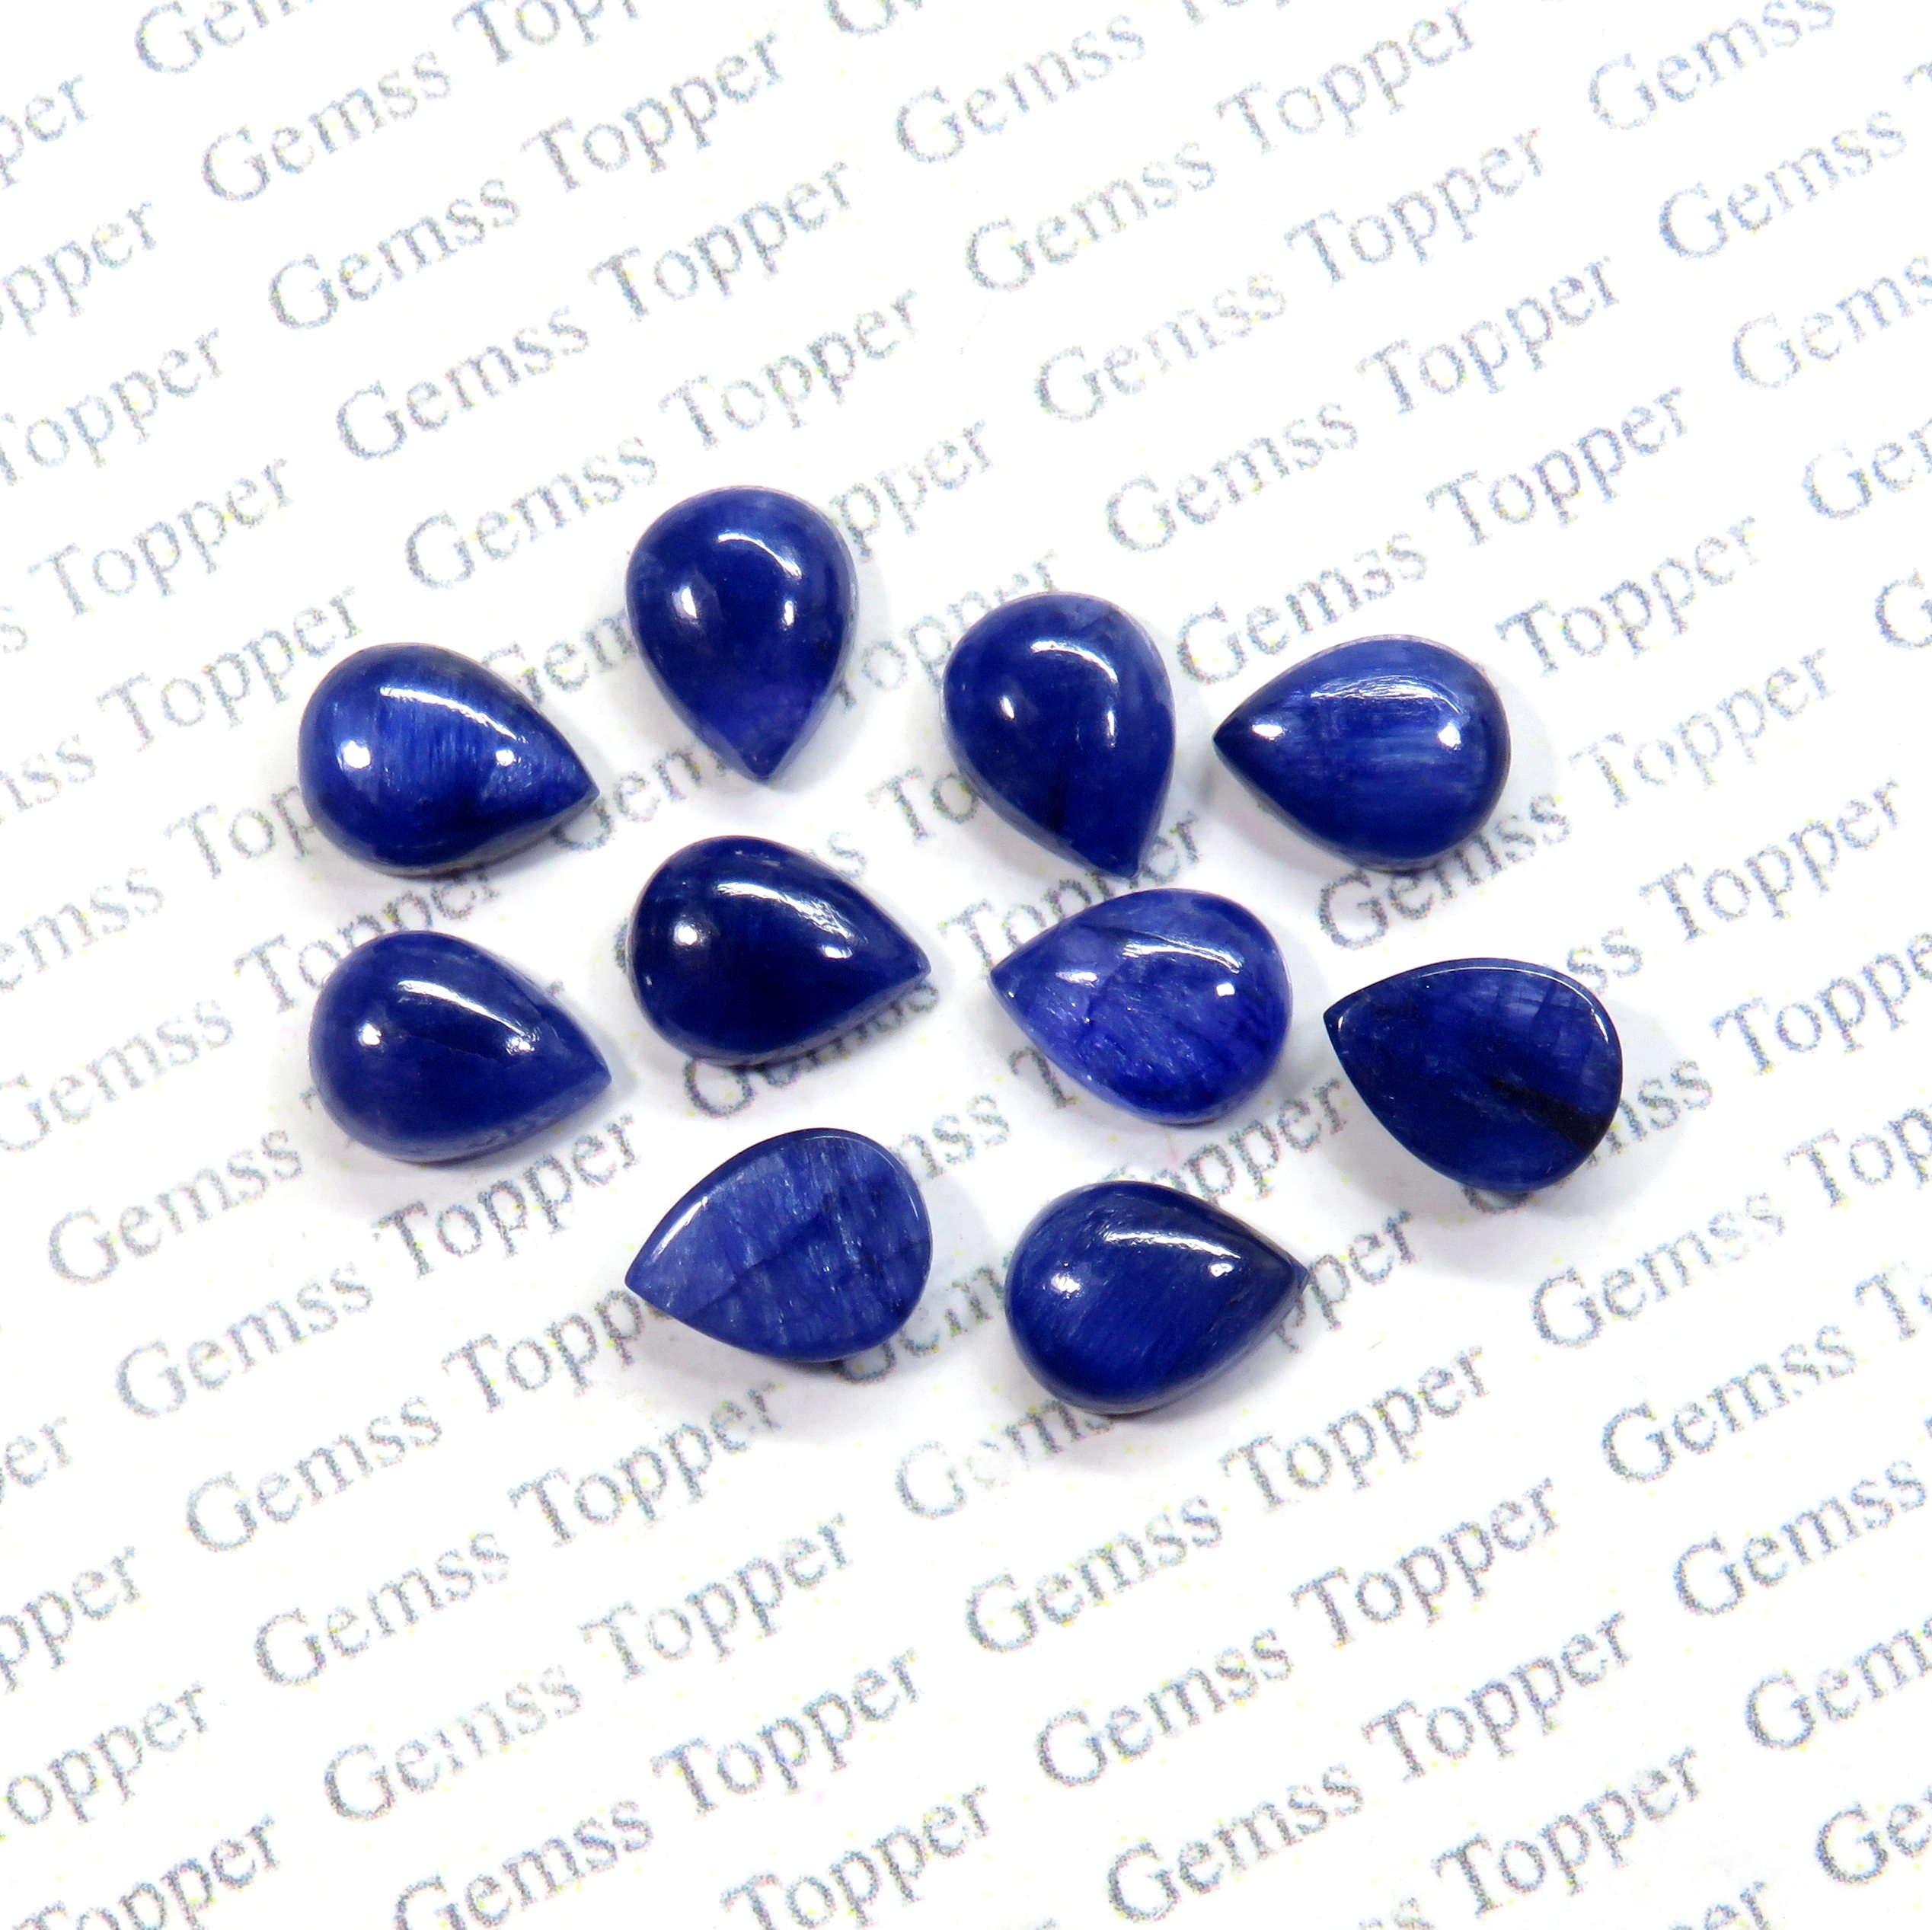 100% Natural Blue Sapphire 5x8 mm Pear Cabochon- AAA Quality Blue Sapphire Smooth Cabochon